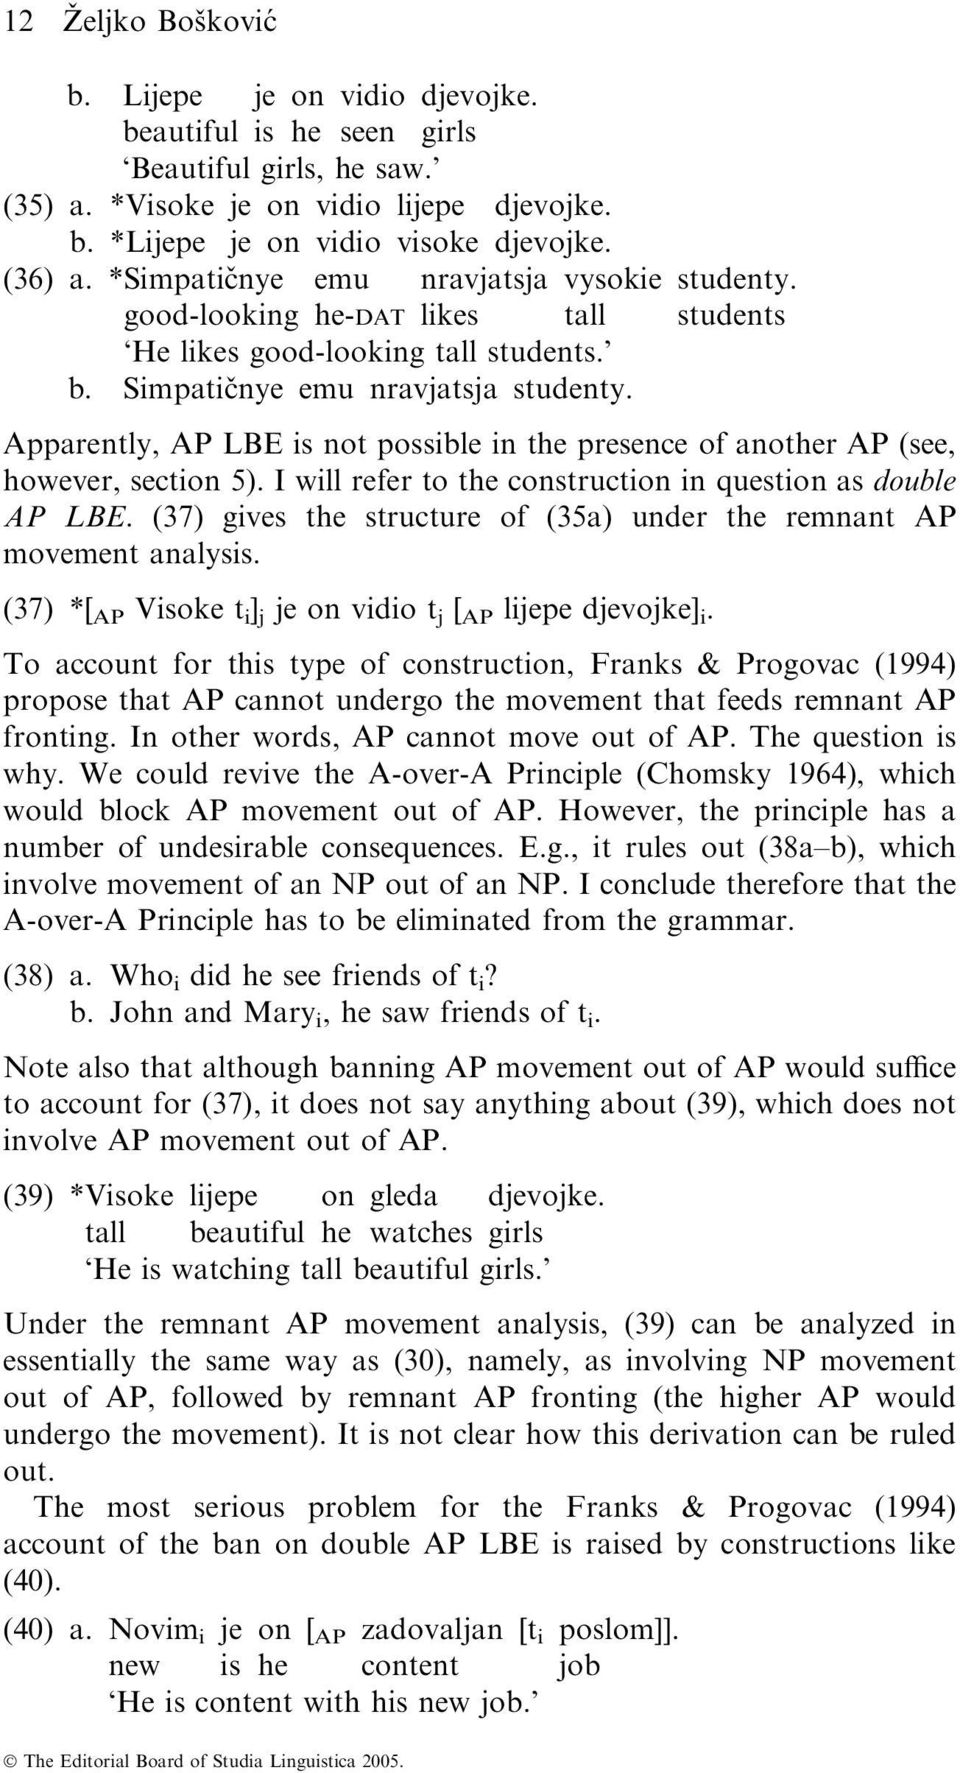 Apparently, AP LBE is not possible in the presence of another AP (see, however, section 5). I will refer to the construction in question as double AP LBE.